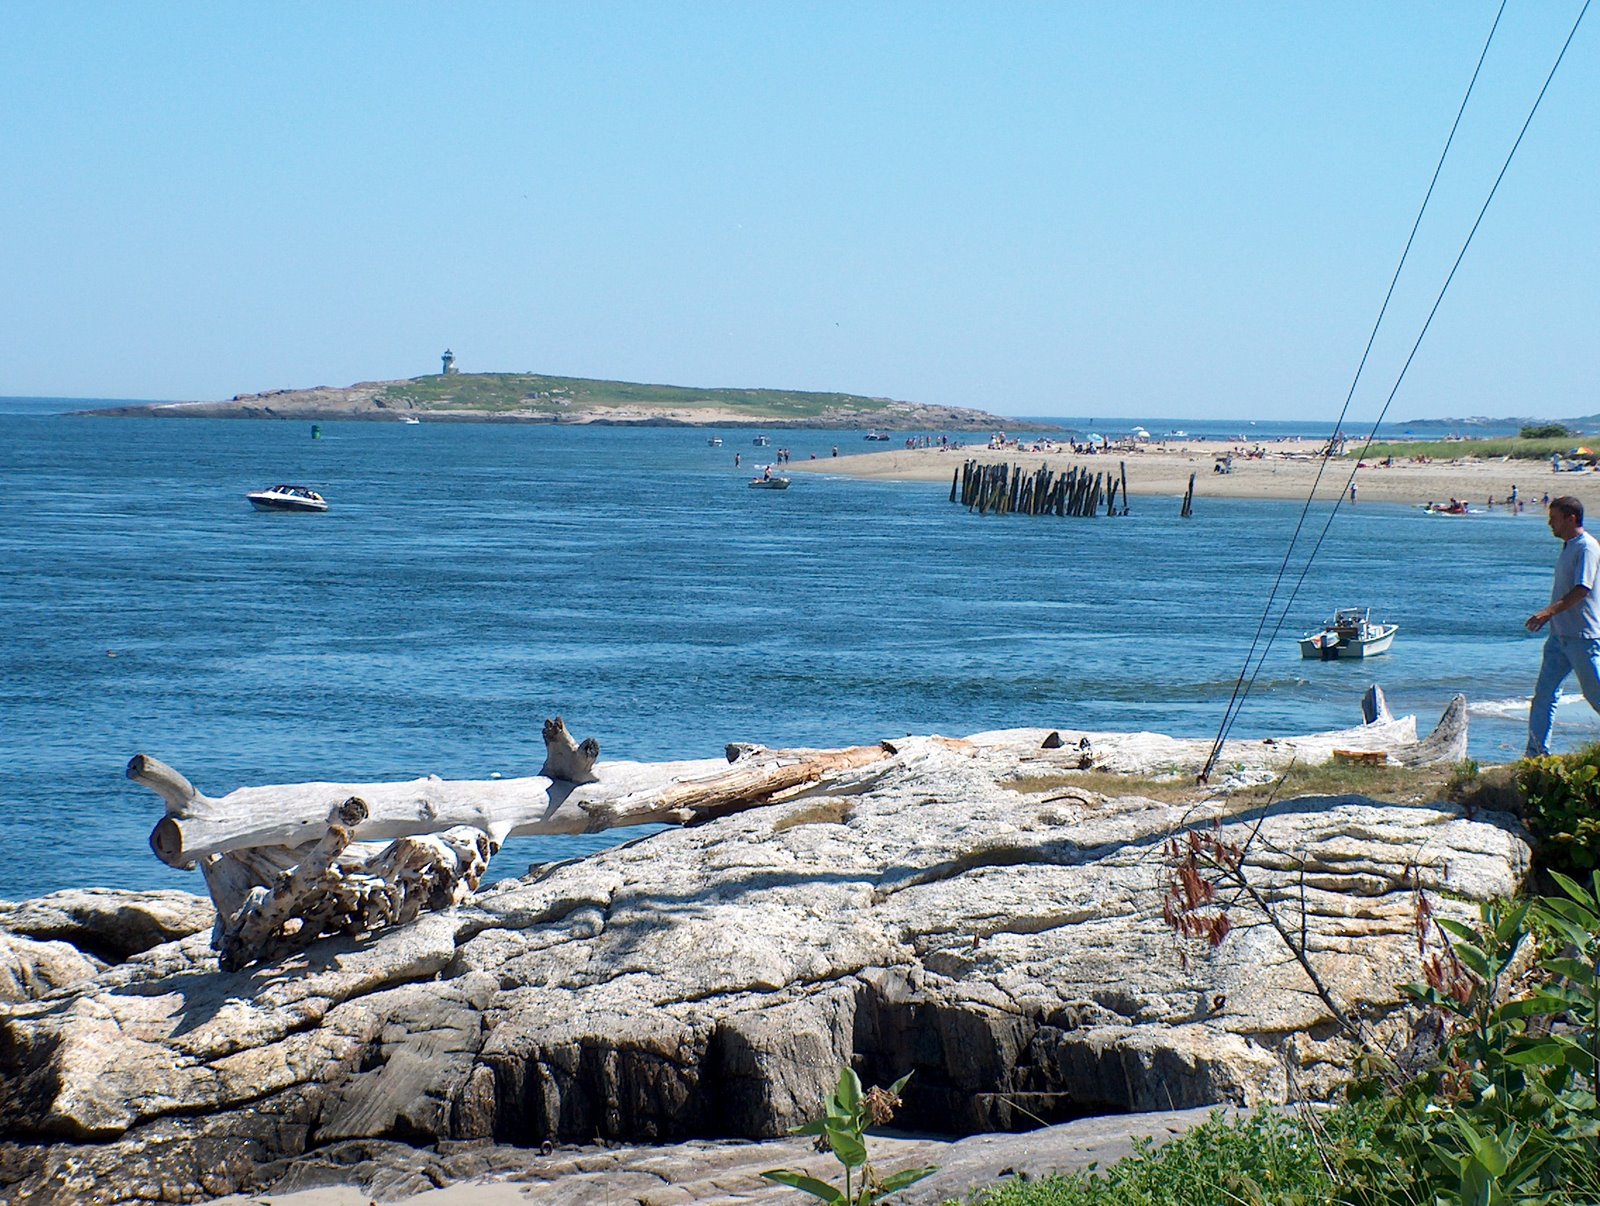 [Pilings+Where+A+Ferry+Terminal+Was+At+Popham+ME+(The+Mouth+Of+The+Kennebec+River).JPG]